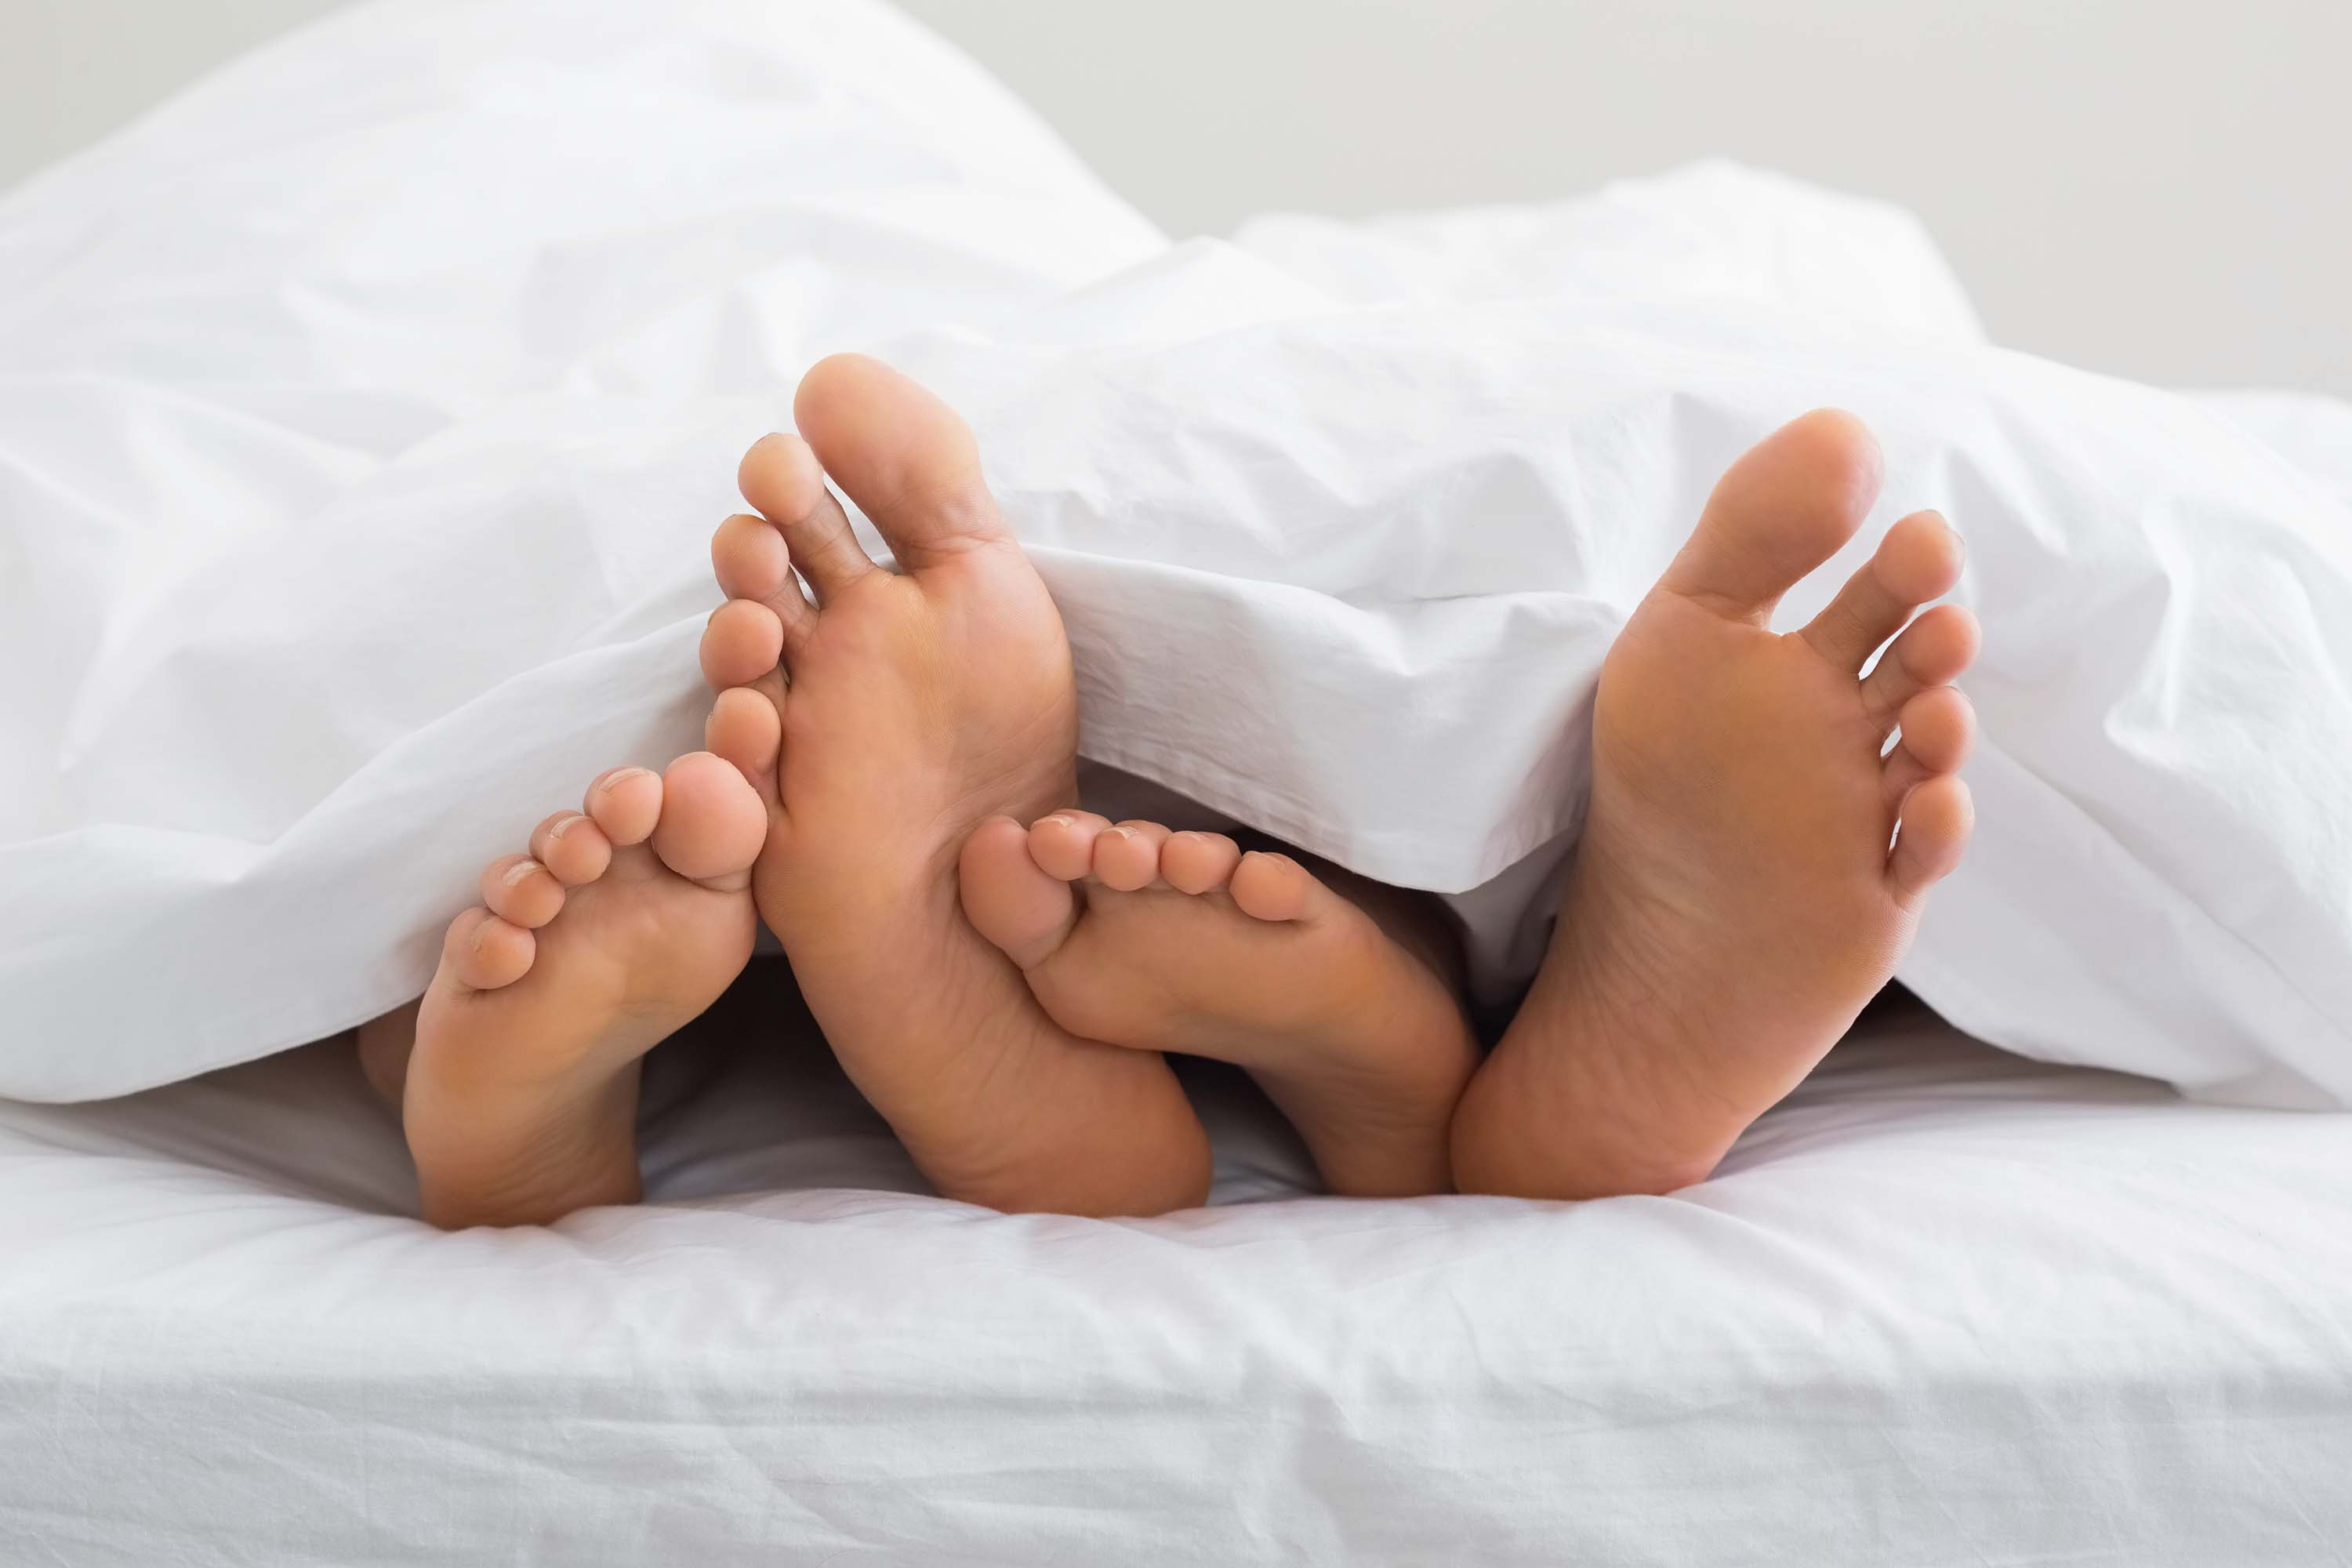 Hot Jappanis Sex Vidios Mom And Son Sleeping - About 1 in 4 Japanese adults in their 20s and 30s is a virgin, study says |  CNN